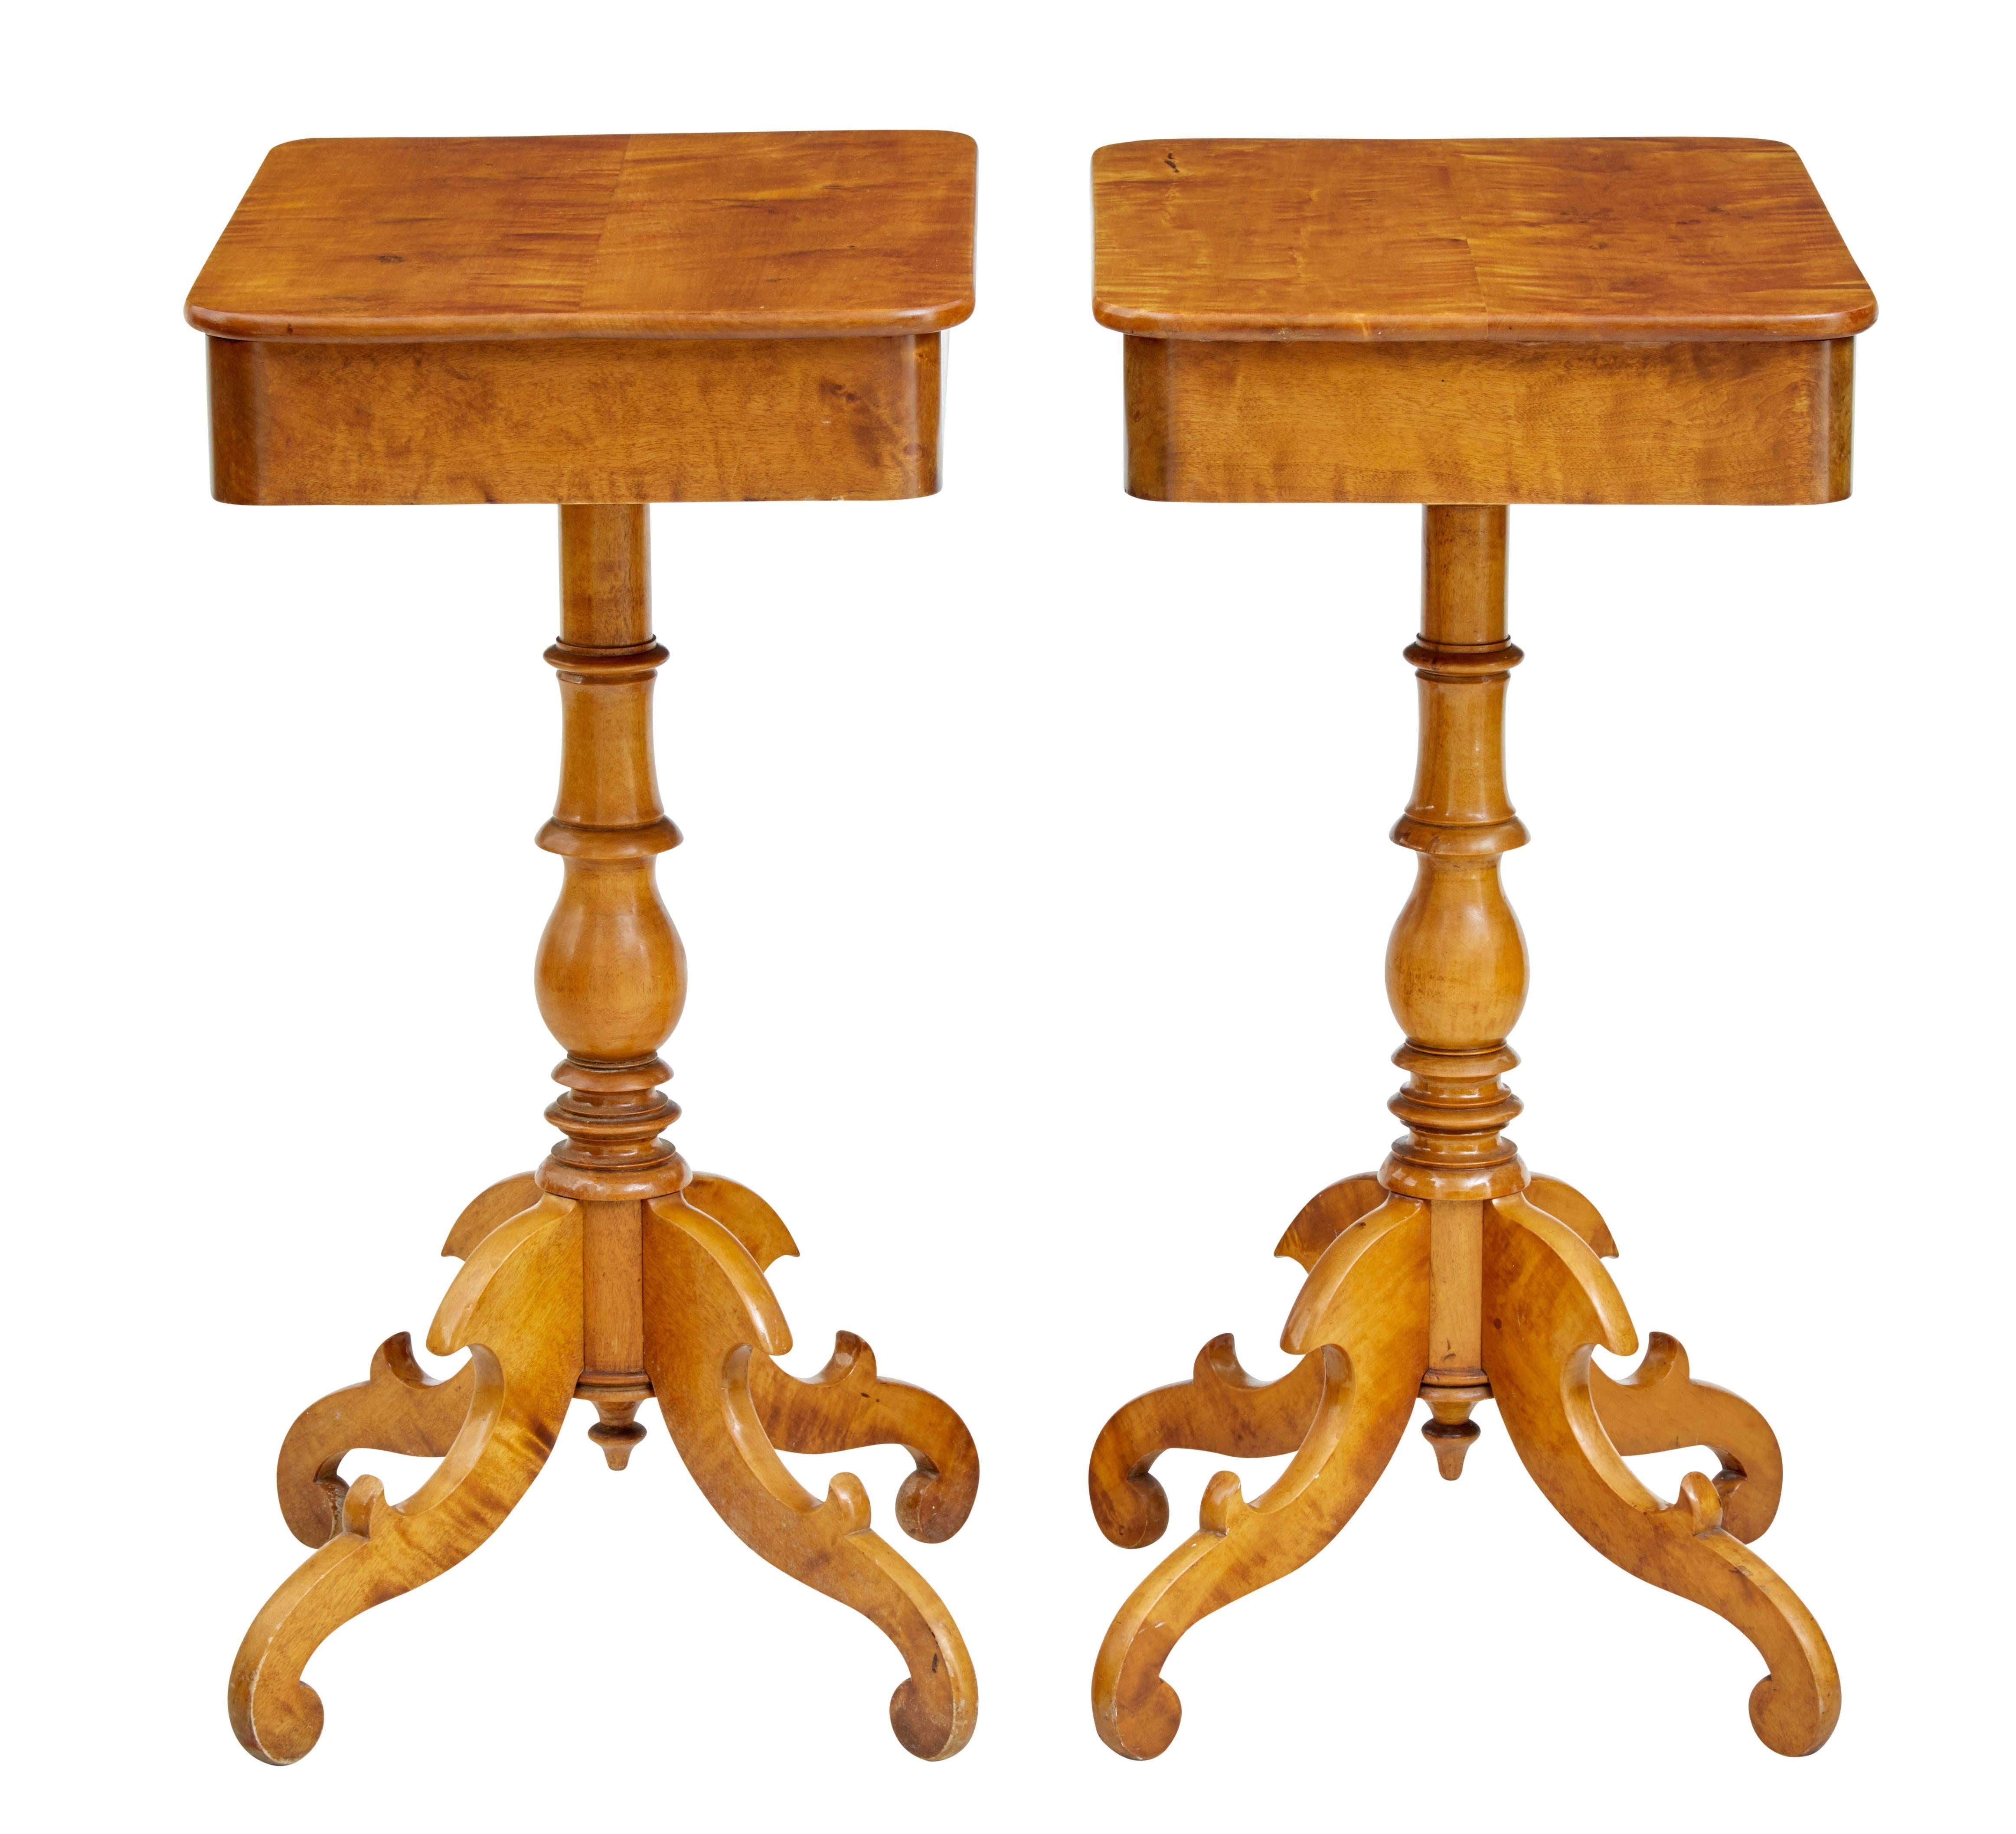 Elegant pair of Swedish birch occasional tables, circa 1890.

Rich golden color, rounded rectangular top with single drawer.

Turned column stem, standing on four scrolling legs.